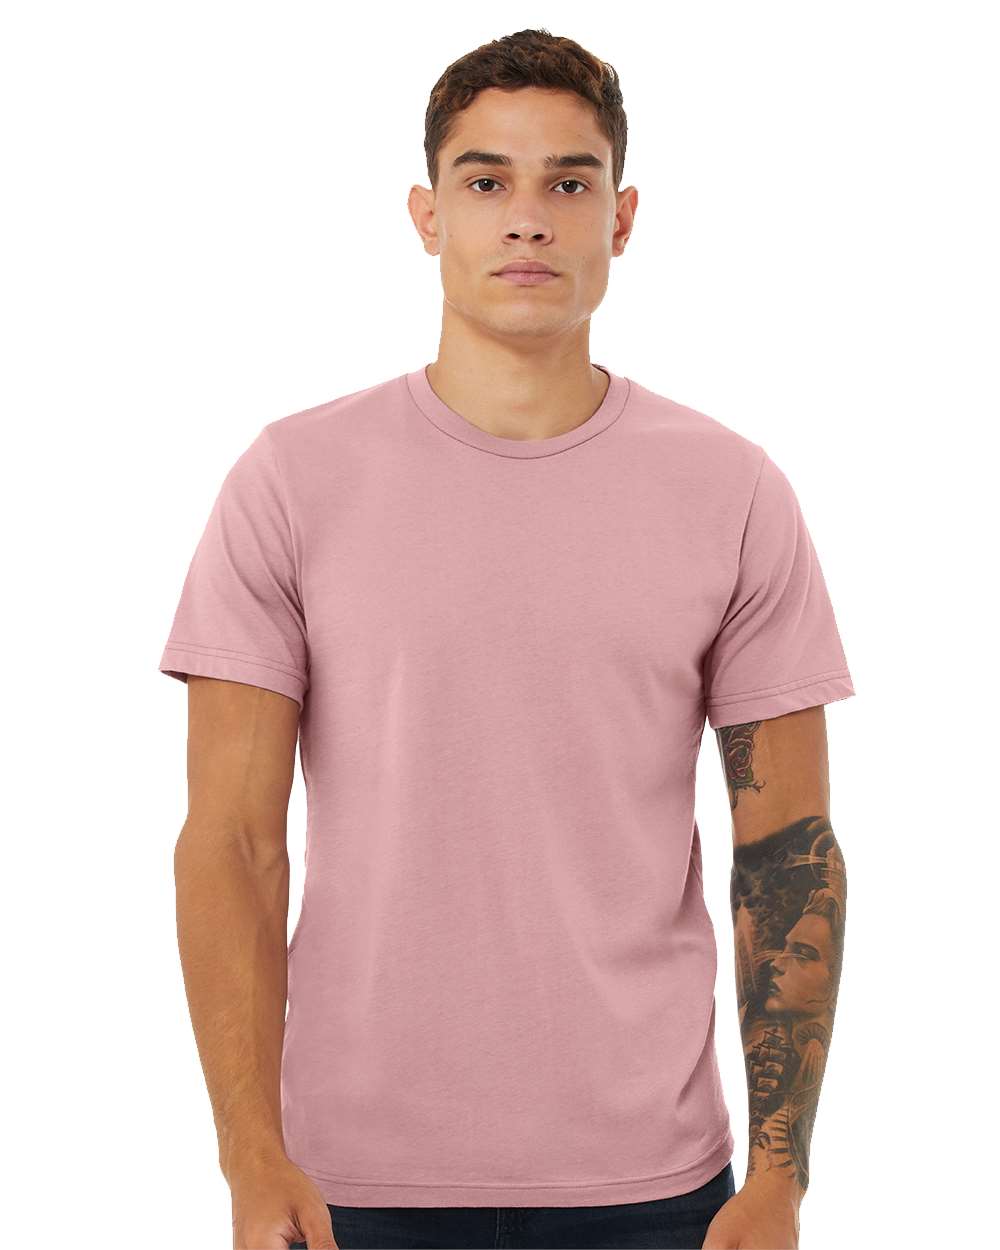 BELLA + CANVAS - Jersey Tee - 3001 - Orchid